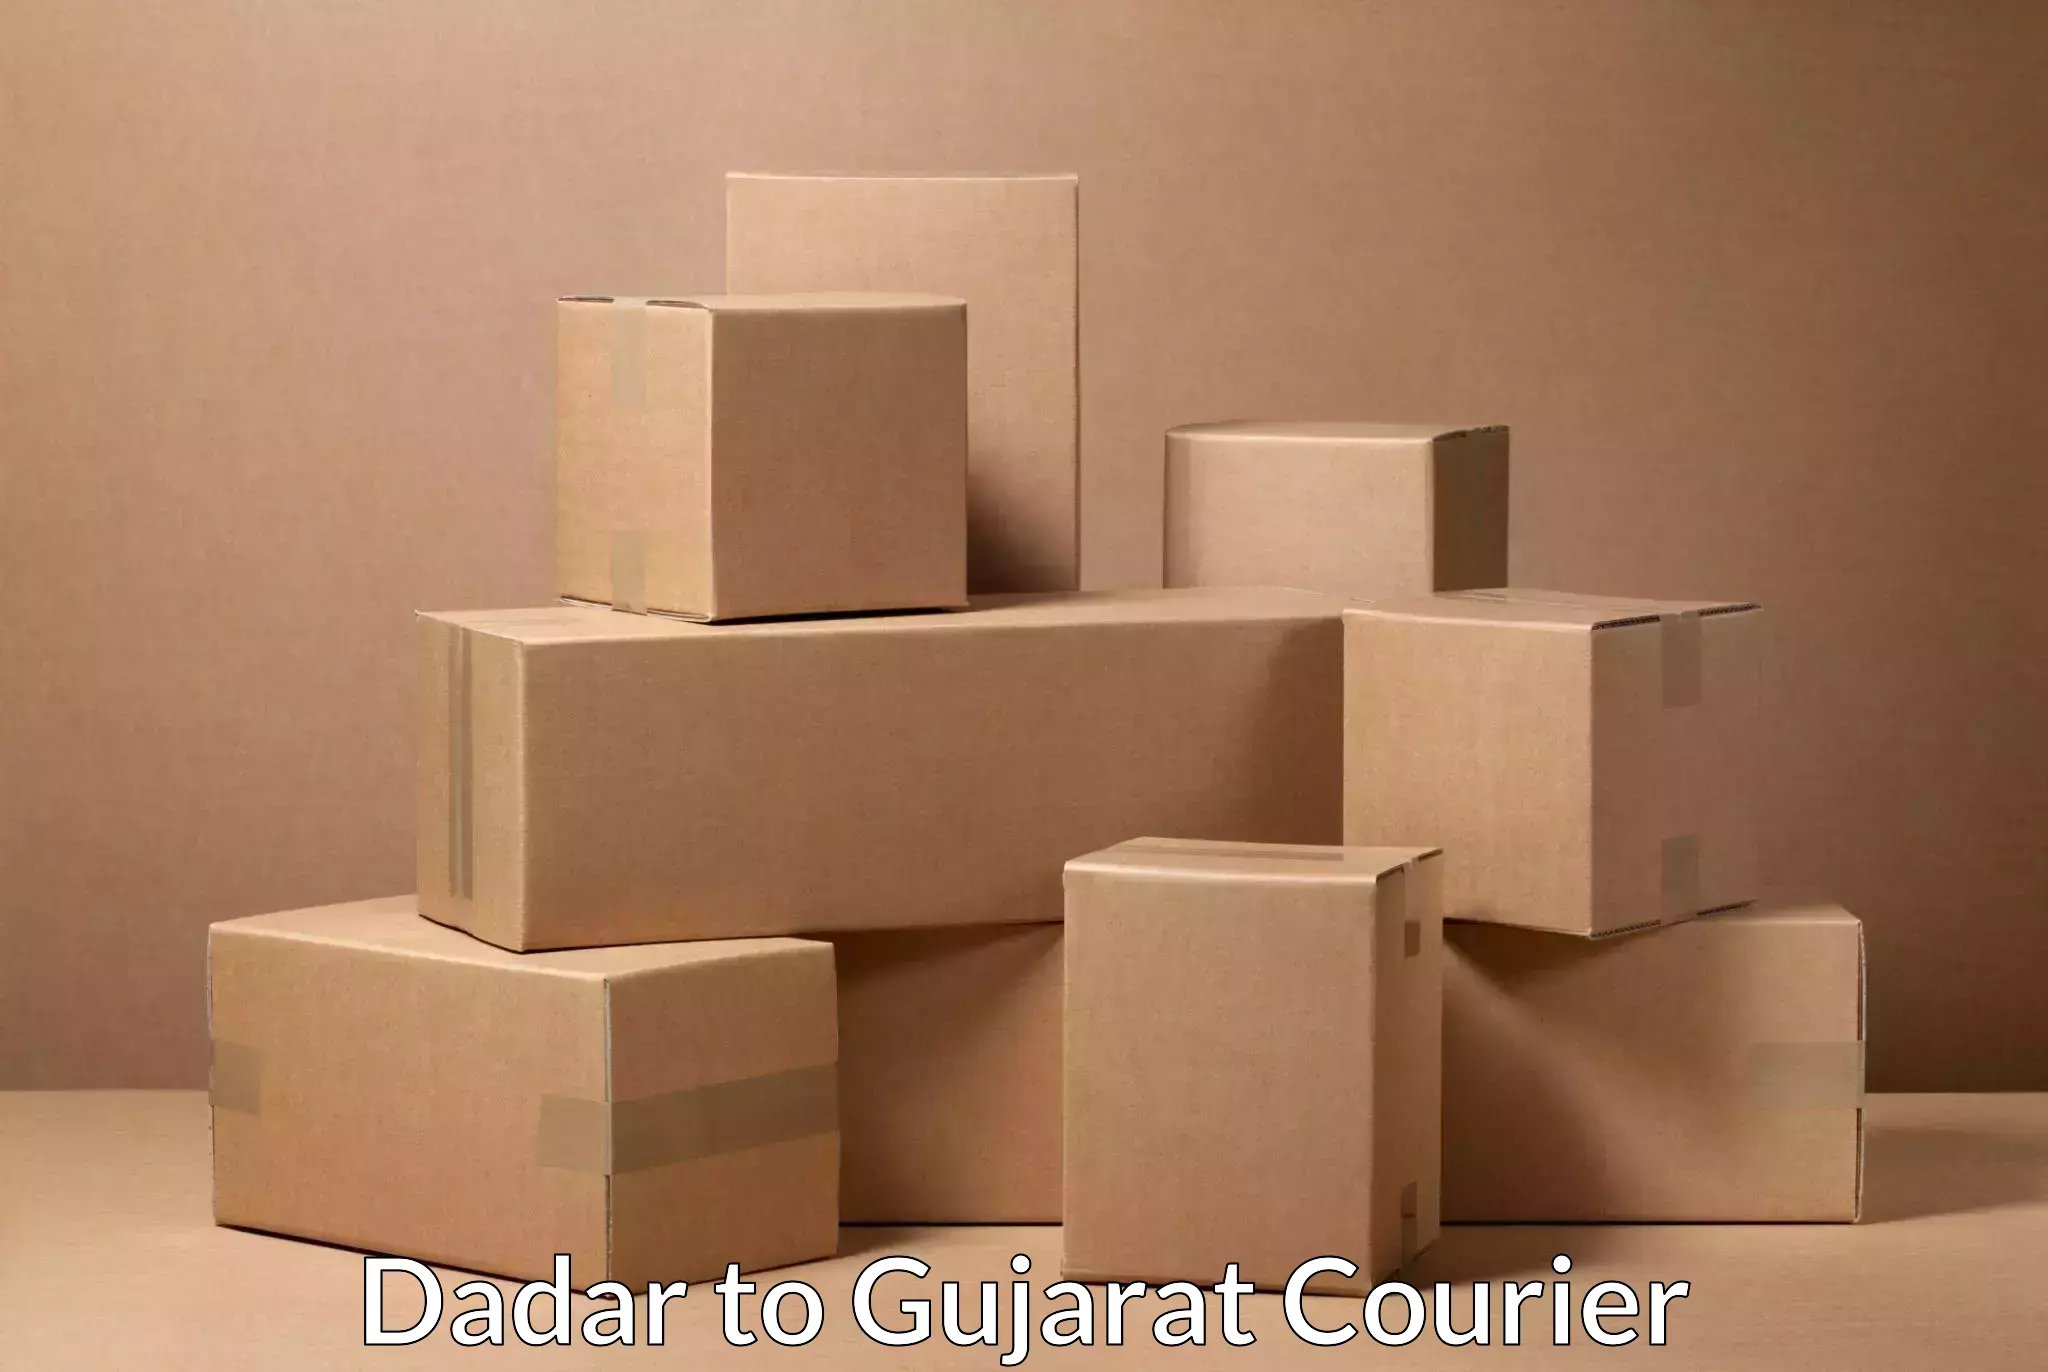 Sustainable shipping practices Dadar to Gujarat